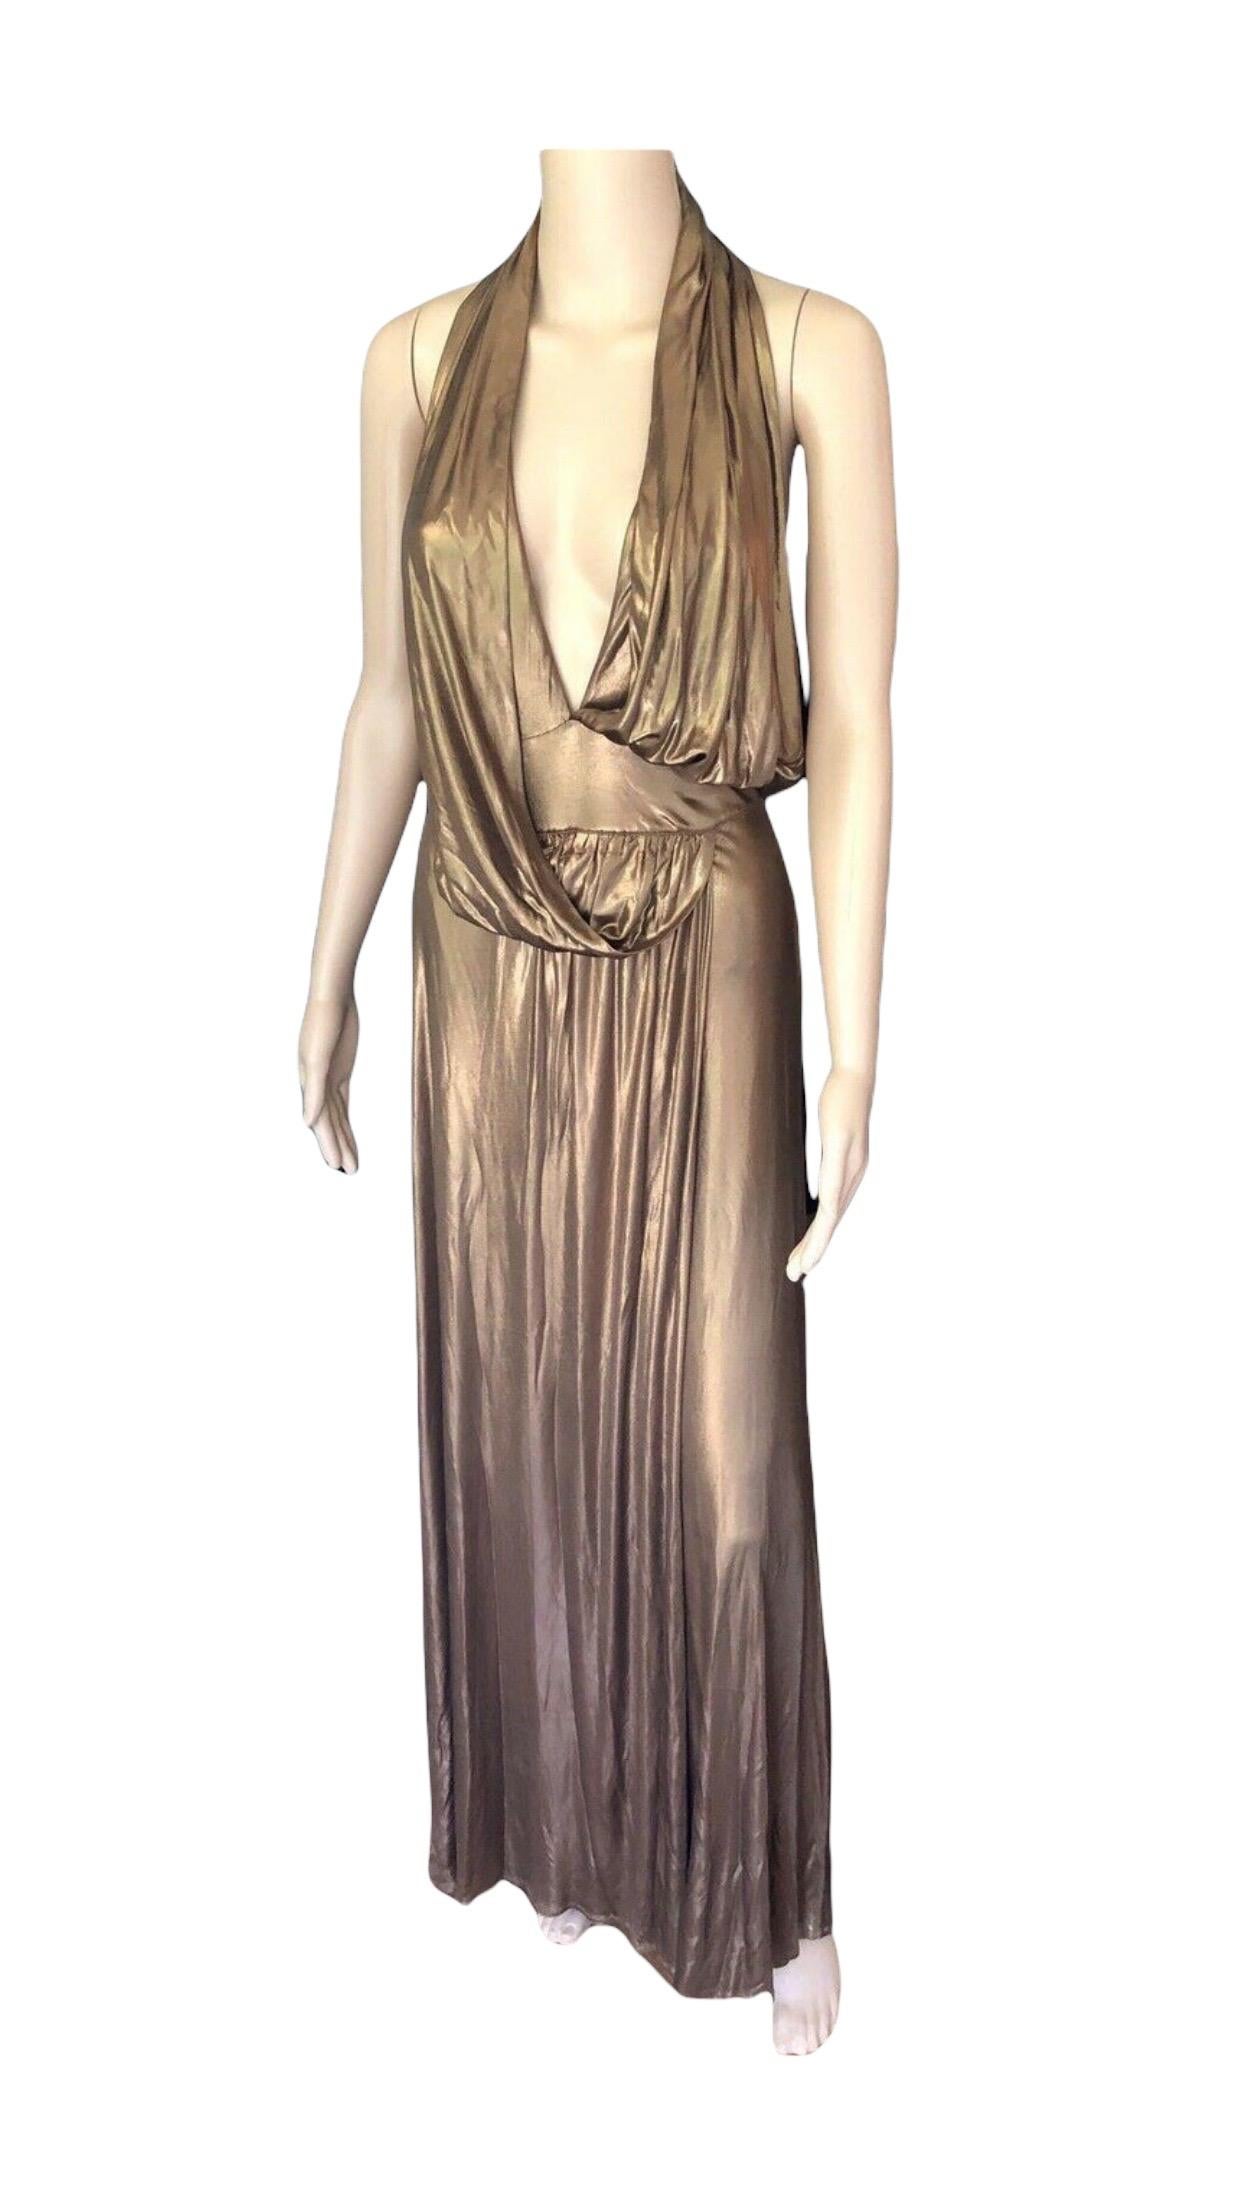 Gucci Runway F/W 2006 Plunging Neckline Backless Gold Metallic Dress Gown 1